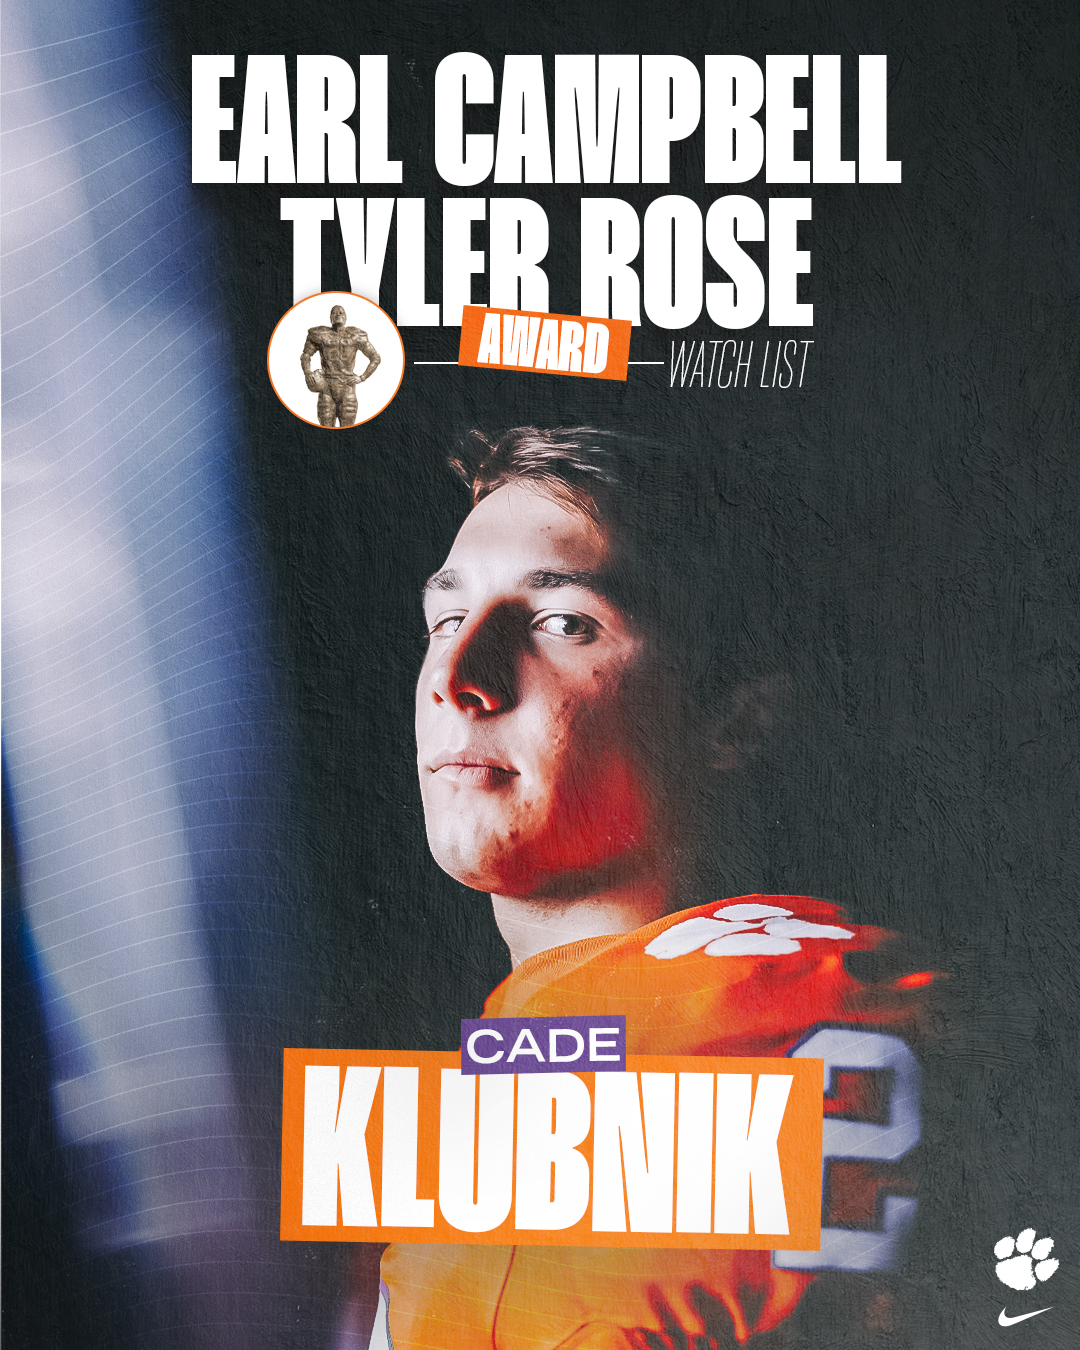 Klubnik Placed on Earl Campbell Tyler Rose Award Watch List